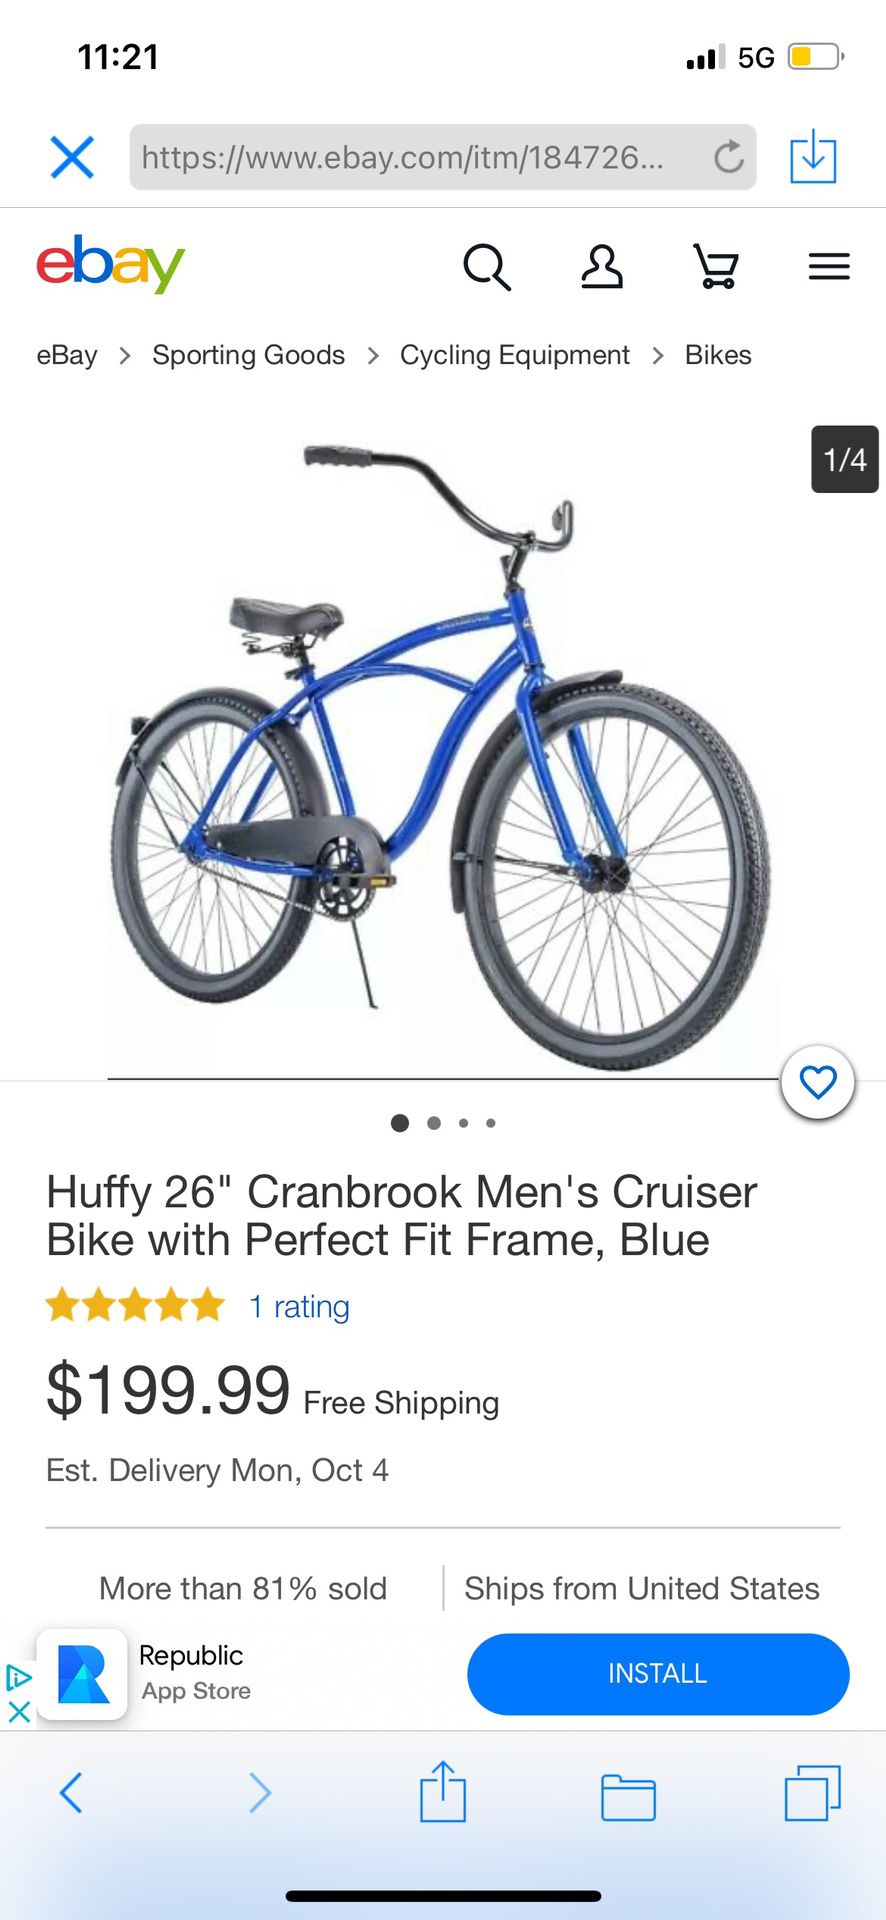 Huffy 26’ Cranbrook men’s cruiser bike with perfect fit frame blue